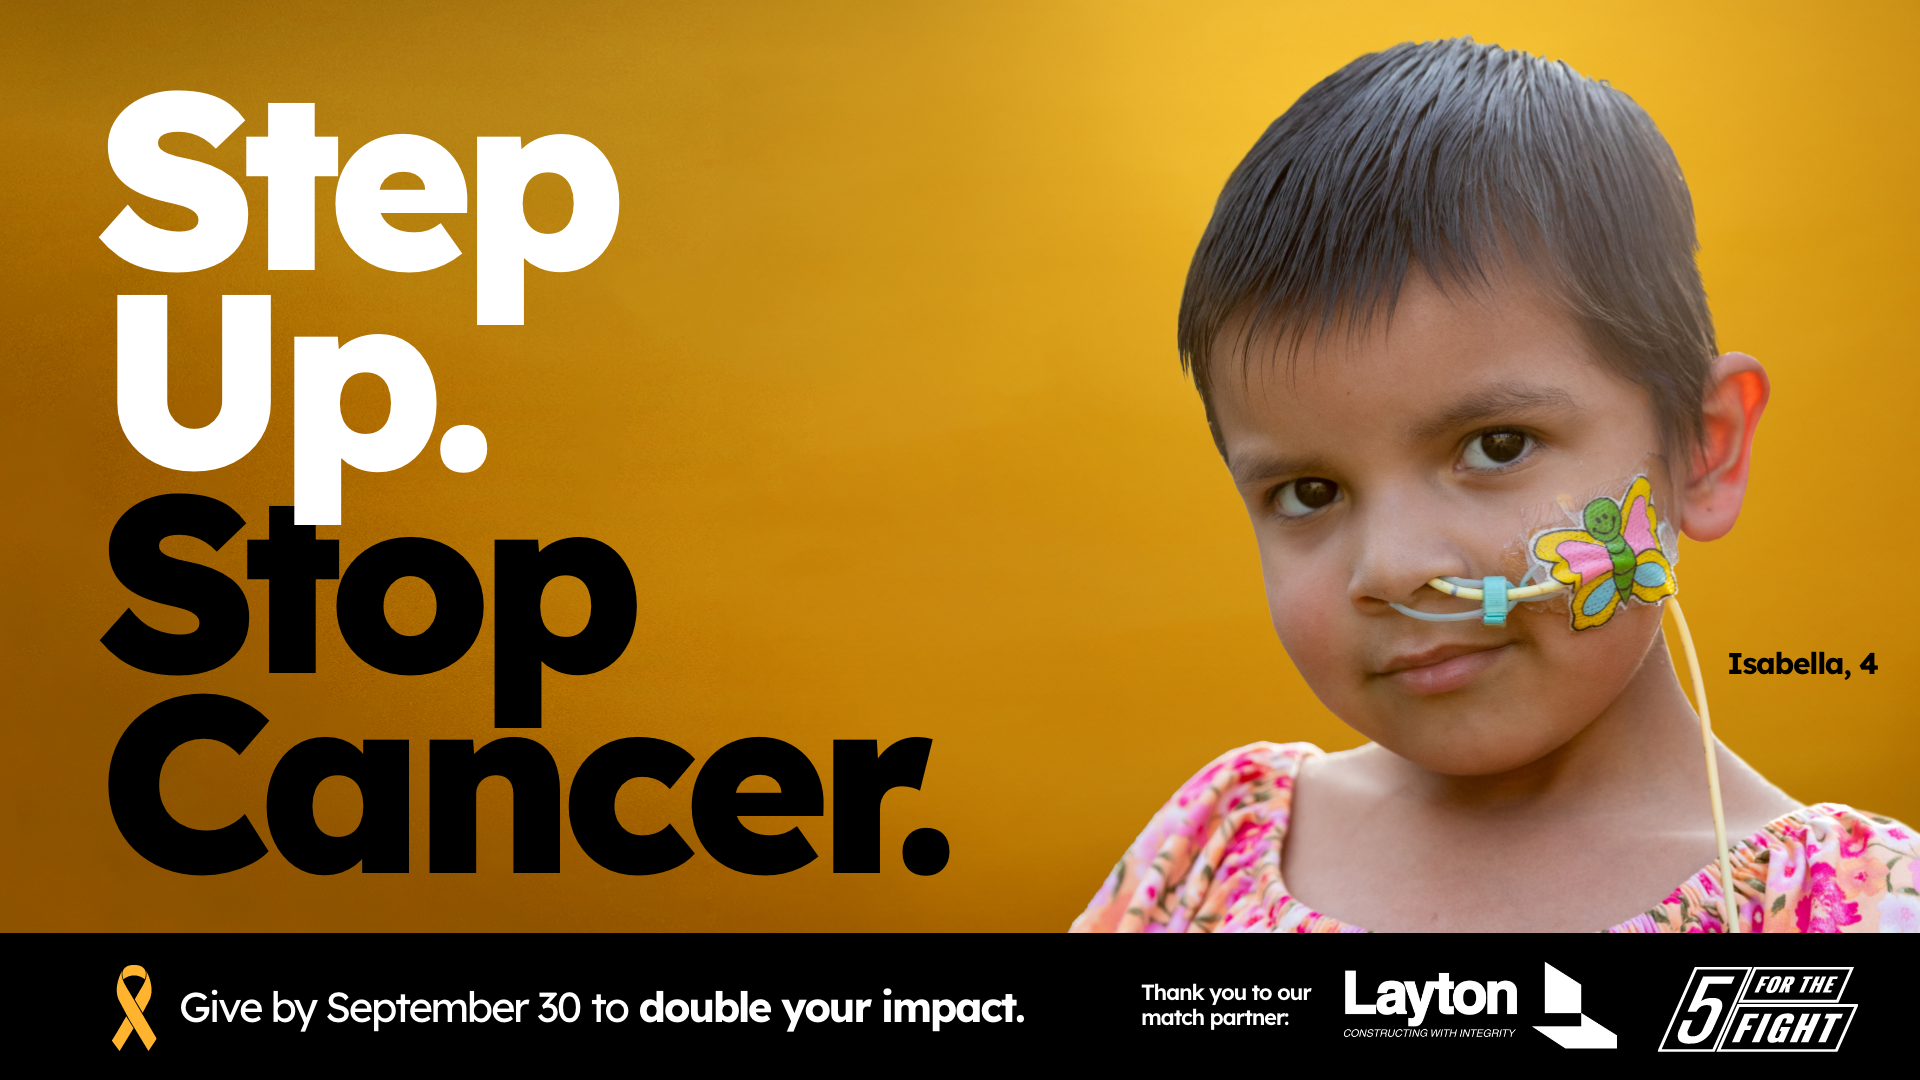 Step Up. Stop Cancer. Give by September 30 to double your impact.